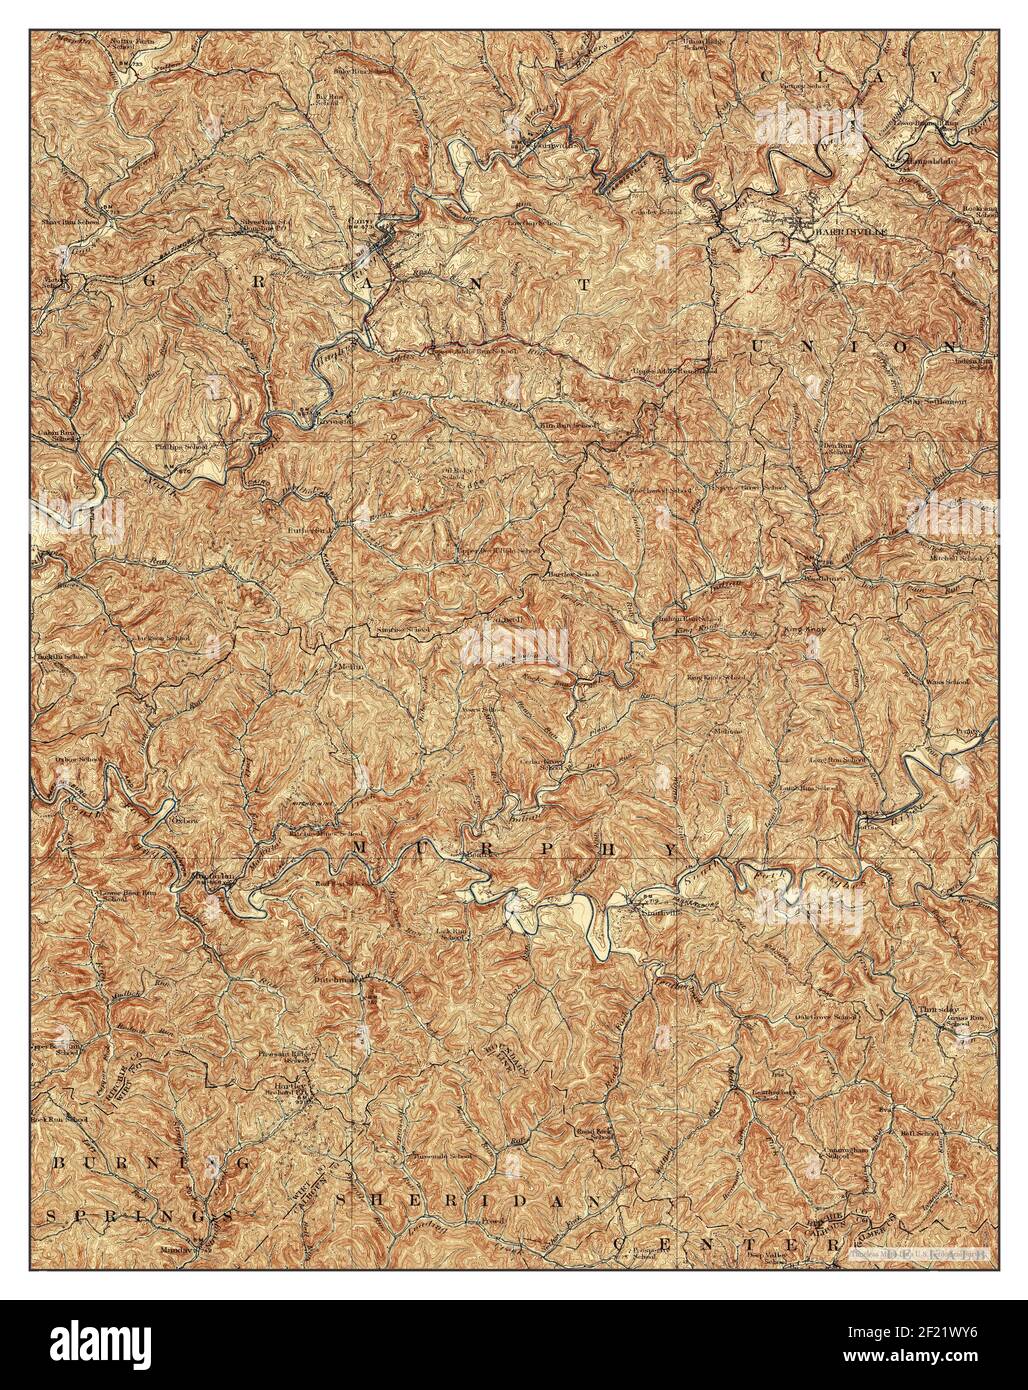 Harrisville, West Virginia, map 1926, 1:62500, United States of America by Timeless Maps, data U.S. Geological Survey Stock Photo